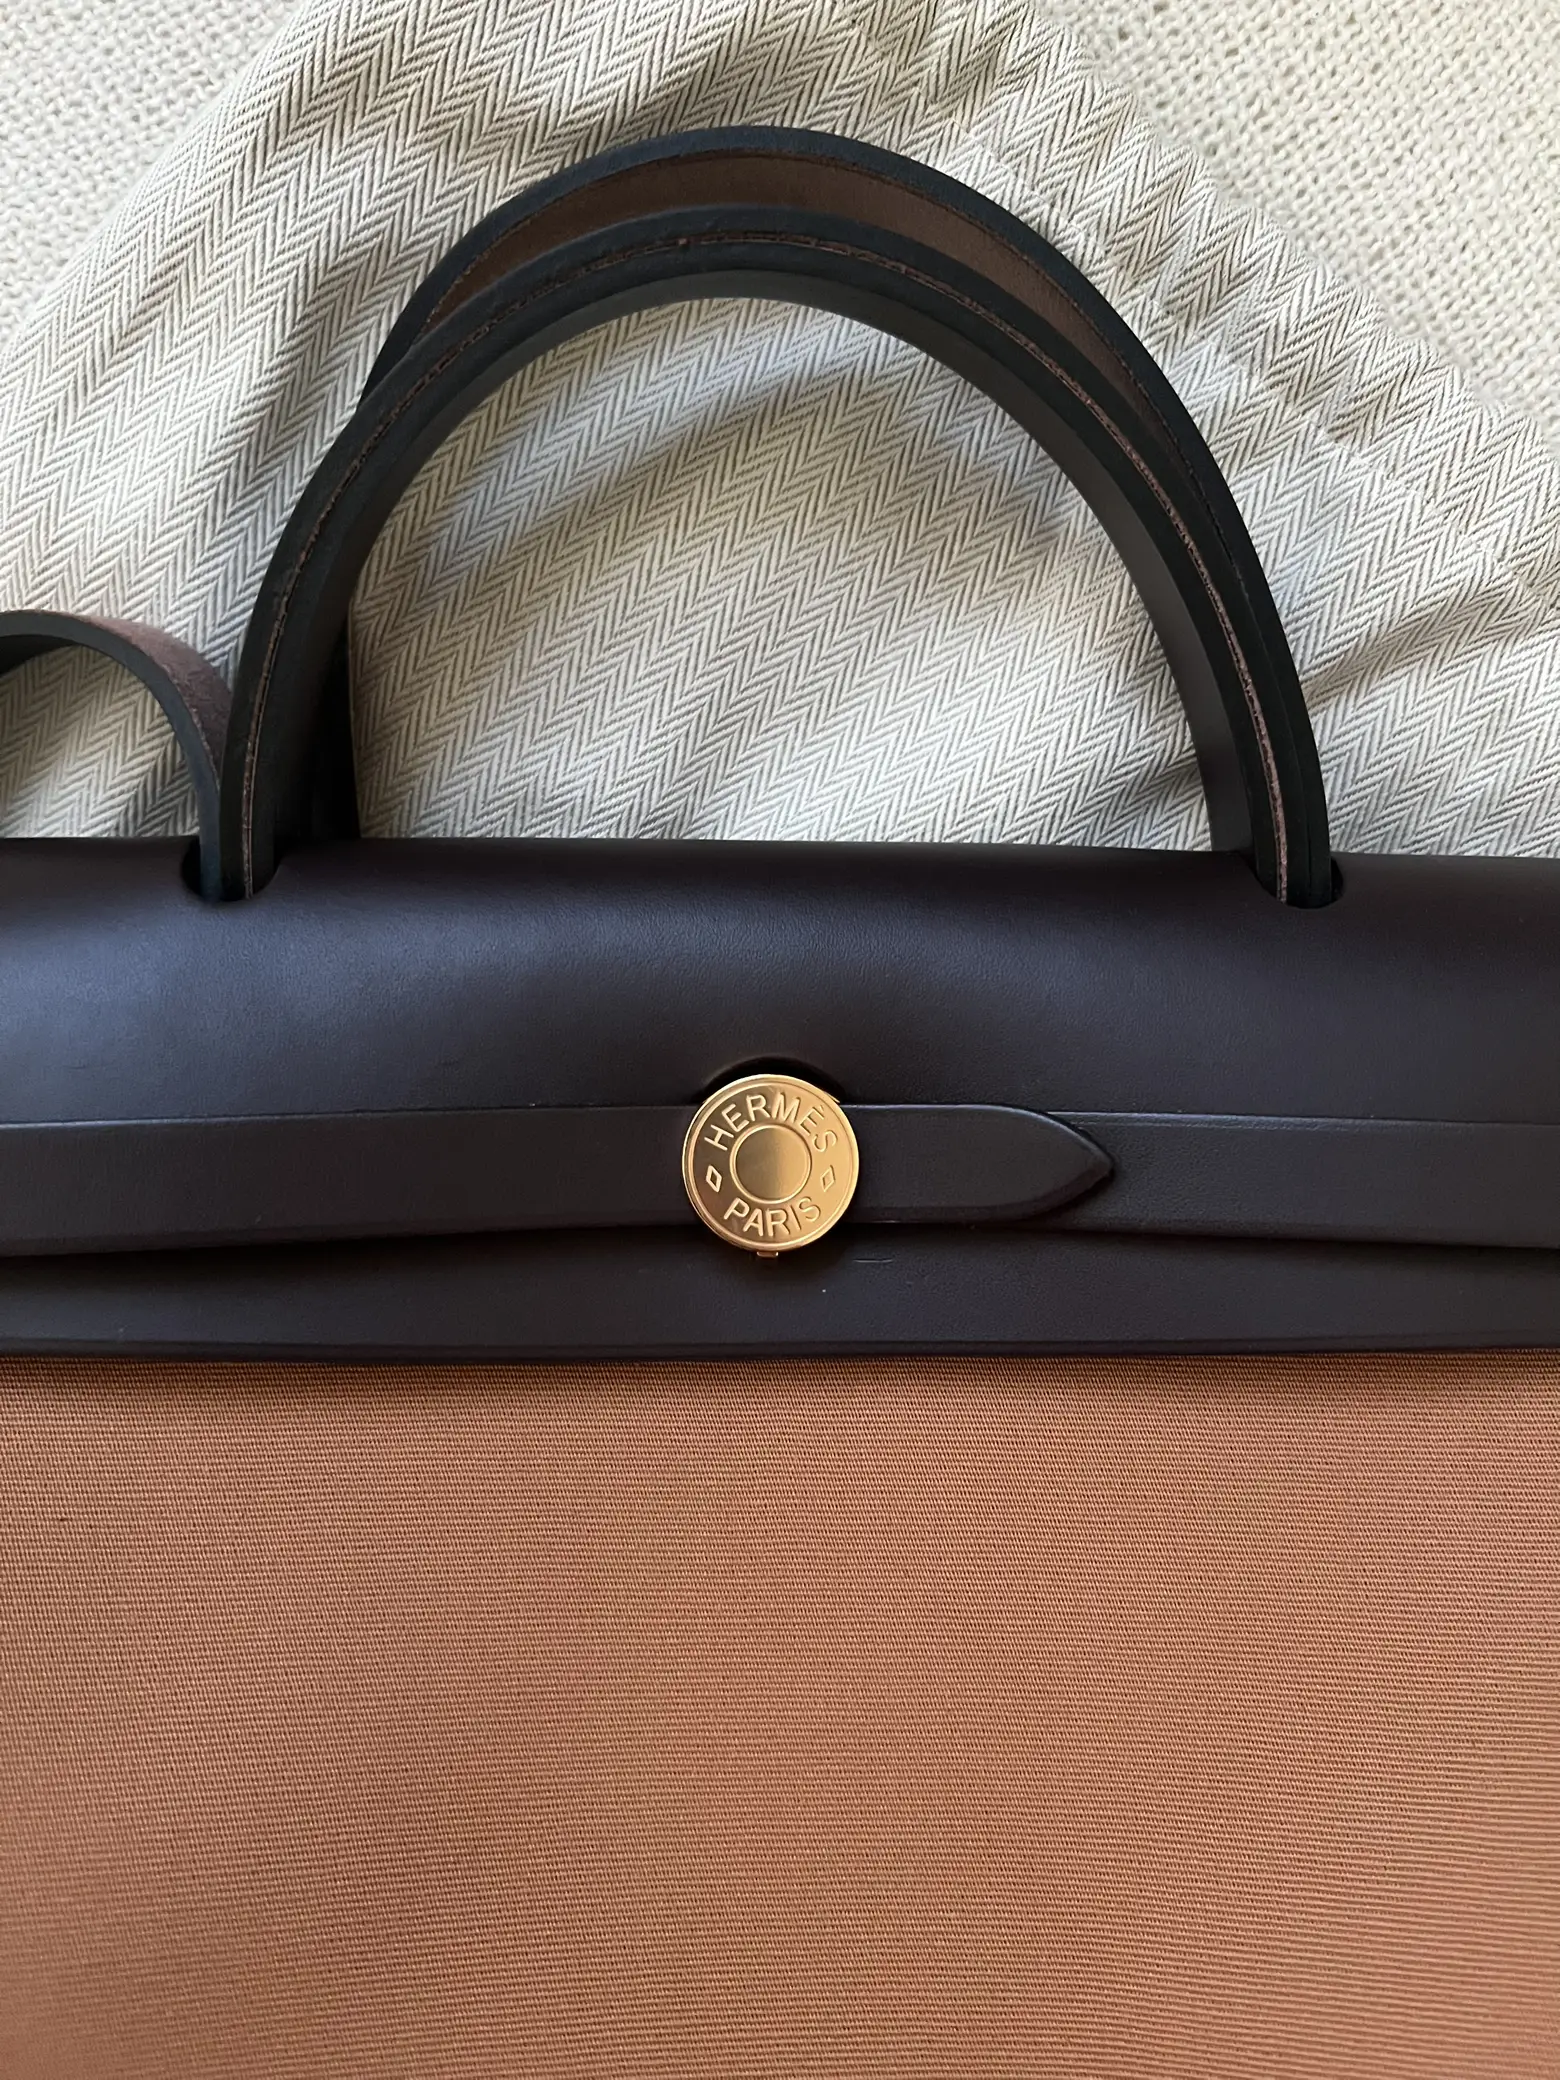 Ginza Xiaoma - Cool Herbag PM in Brown canvas and leather